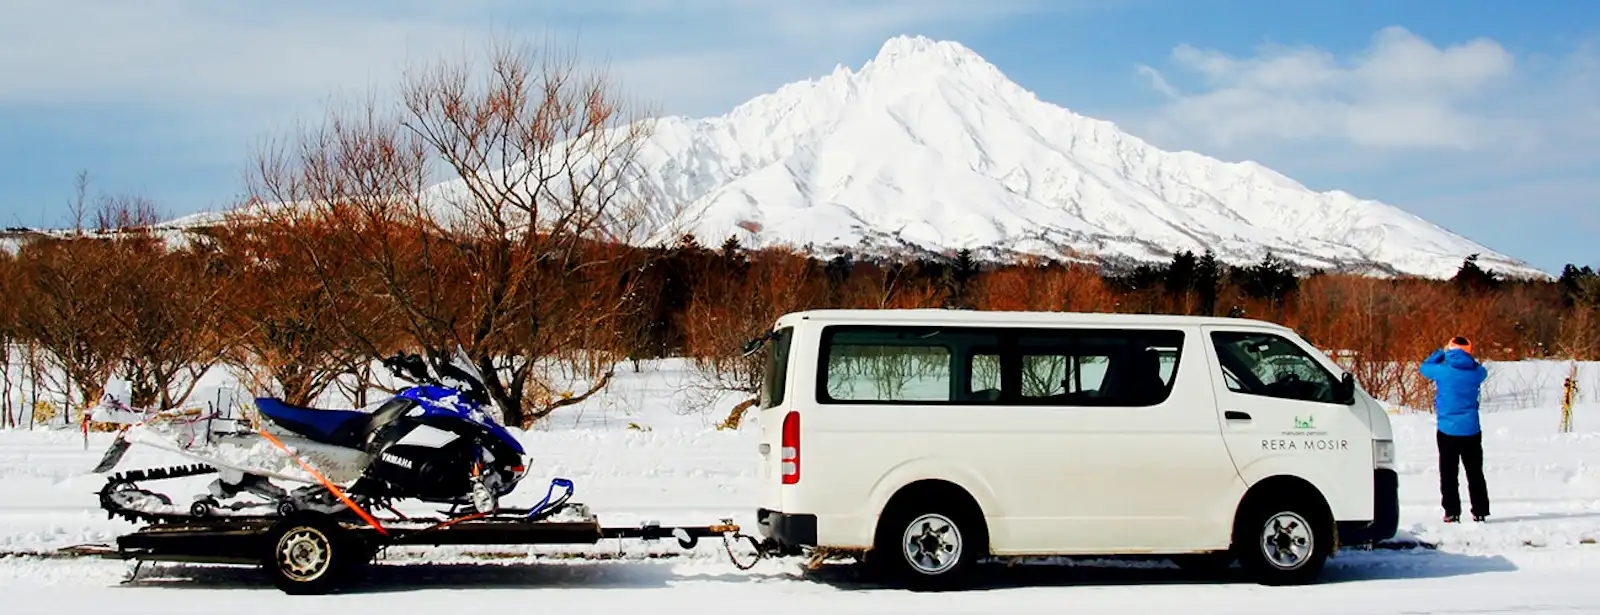 Ski in Japan: All you must know to organize your trip post image